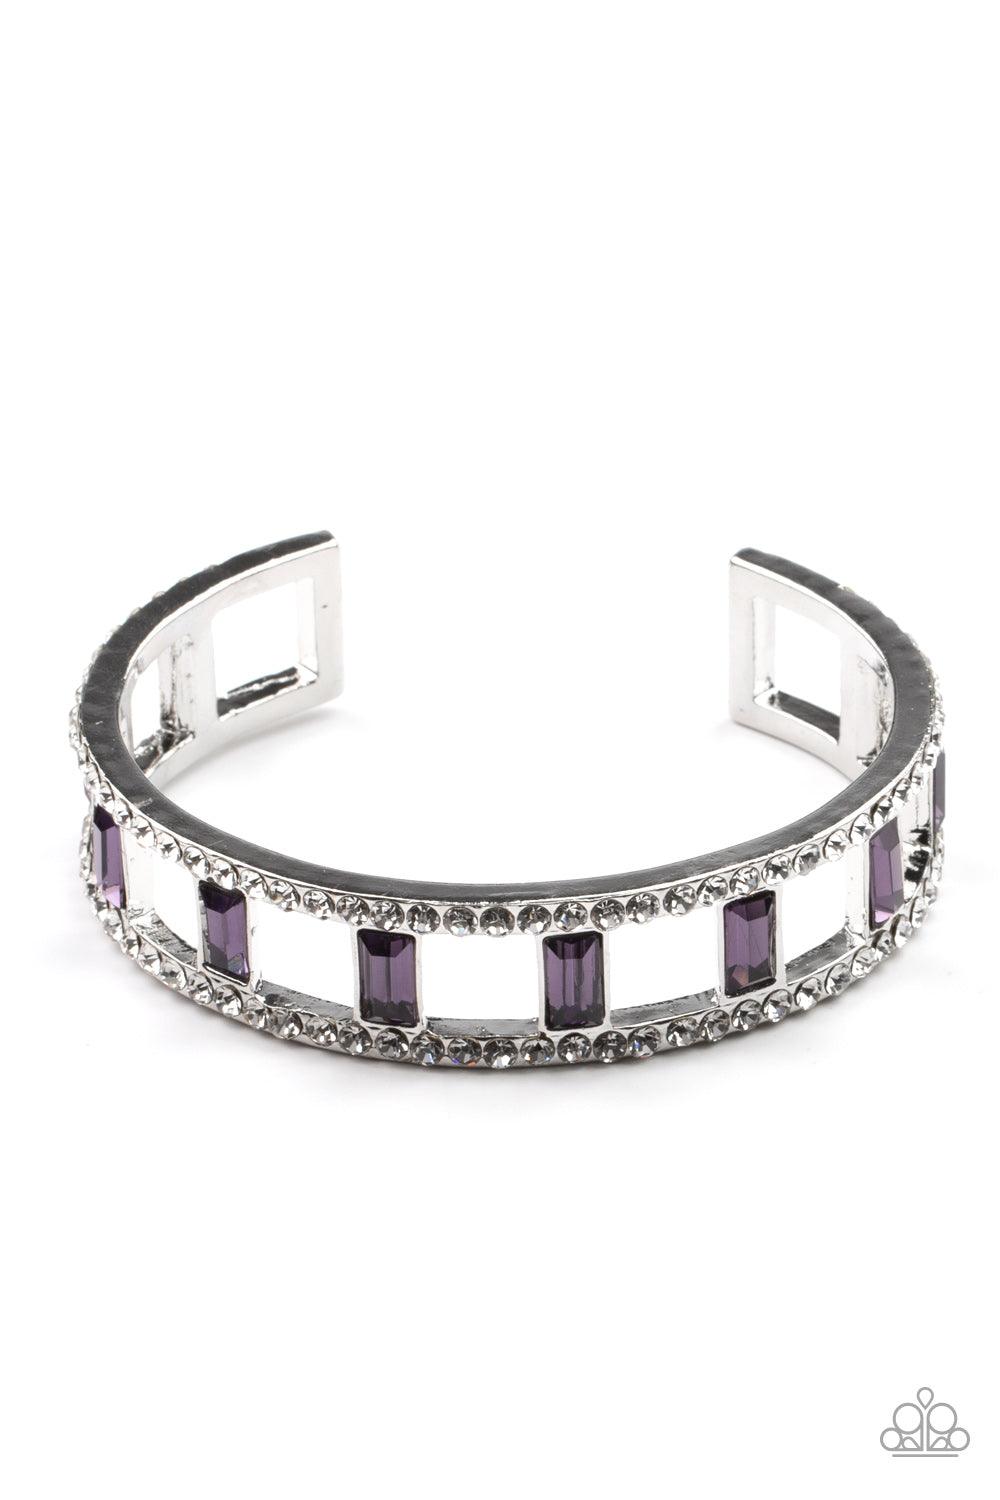 Paparazzi Accessories Industrial Icing - Purple Bands of glittery white rhinestones overlaid on silver frames create an airy channel-like framework. Elegant baguette style cut purple gems, connected to the glittery framework, circle around the wrist for a